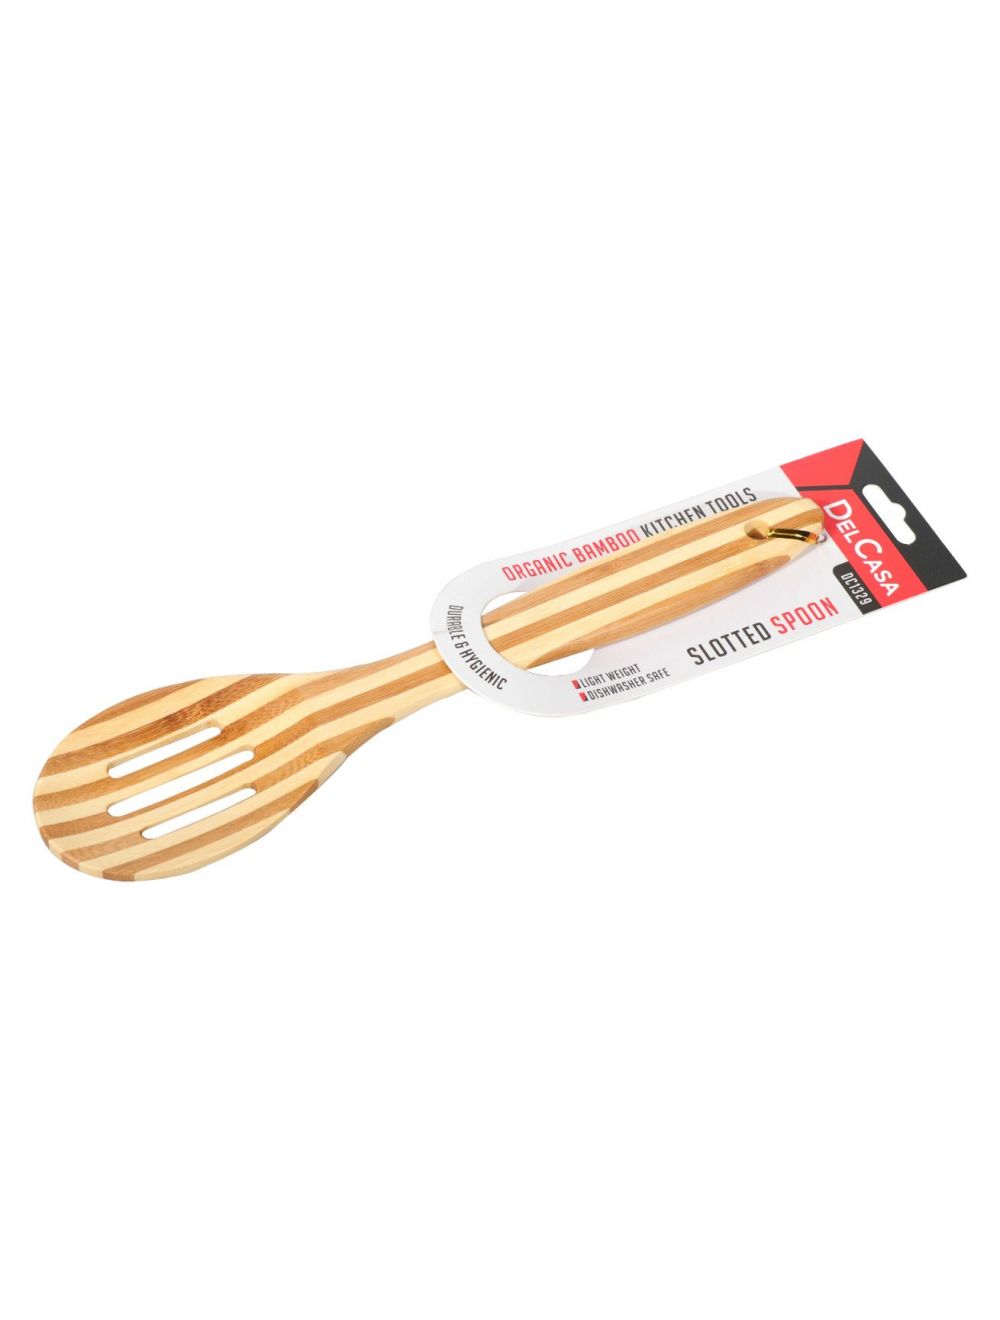 Delcasa Bamboo Slotted Spoon -DC1329